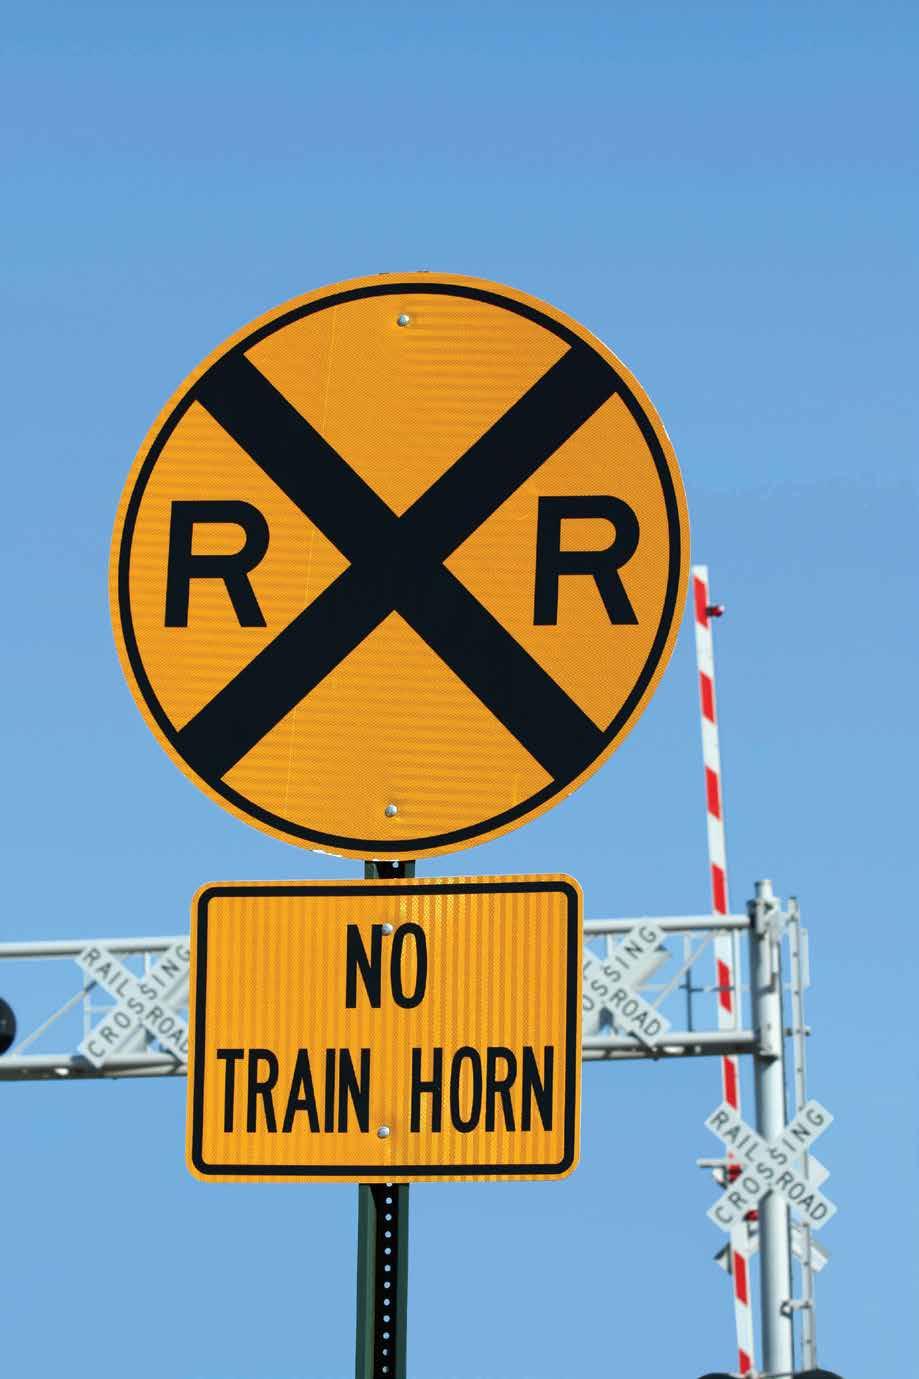 Train Horns STANDARD POLICY QUIET ZONE Railroad engineers will begin to sound train horns at least 15 seconds, and no more than In a quiet zone, there is no routine sounding of horns when approaching